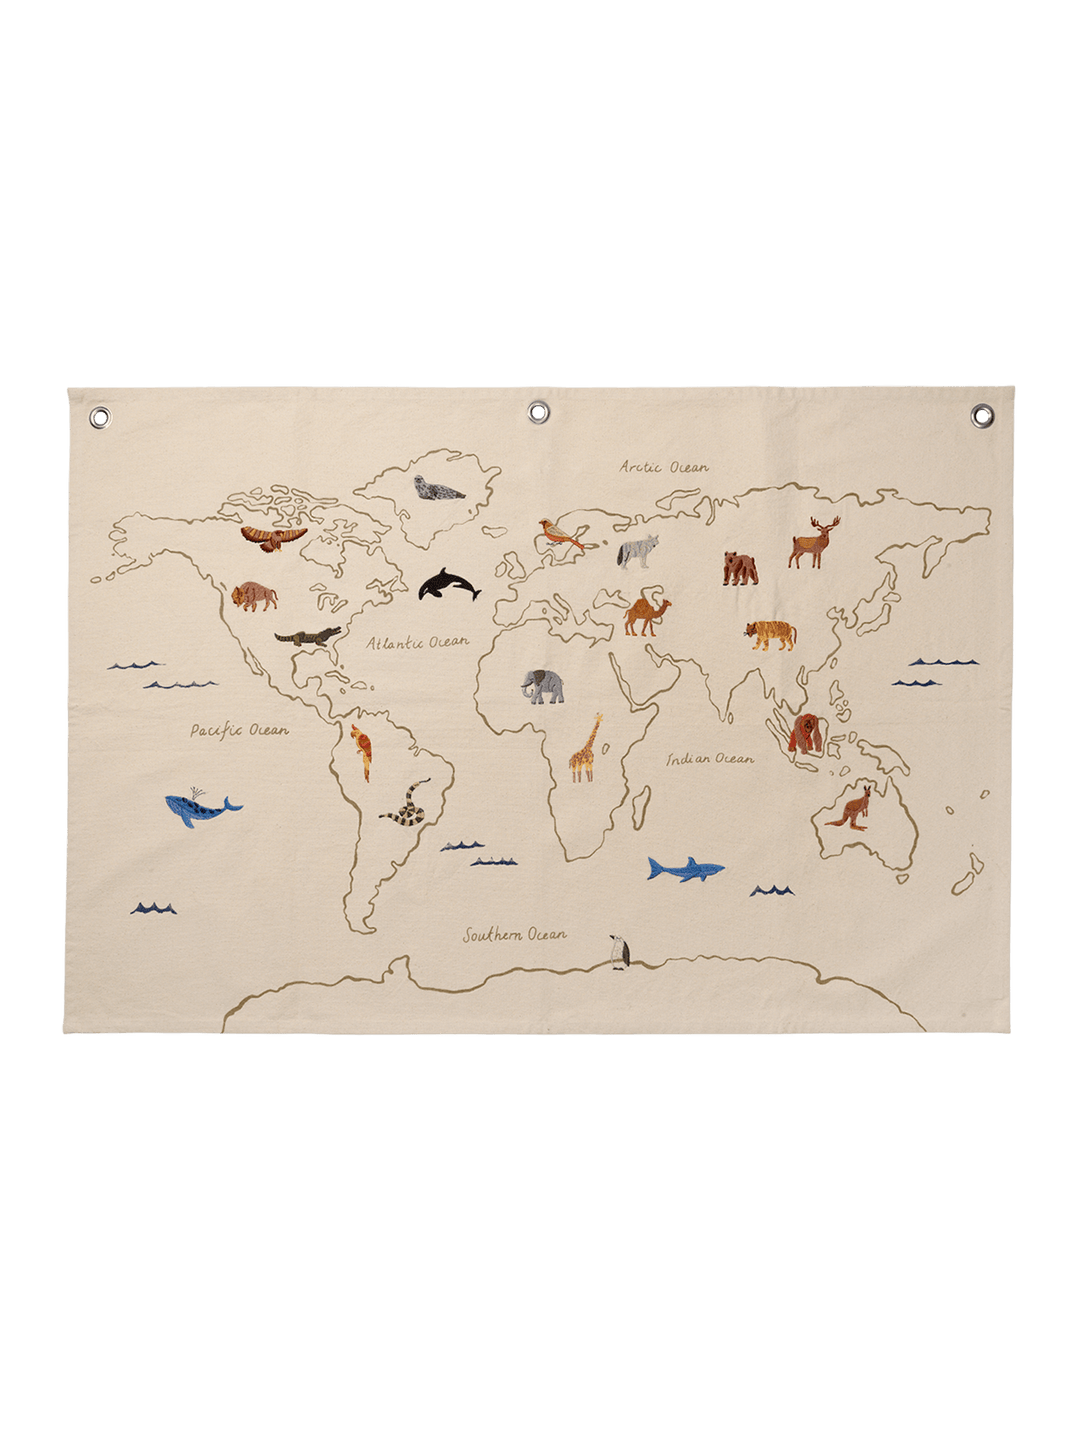 The World Textile Map